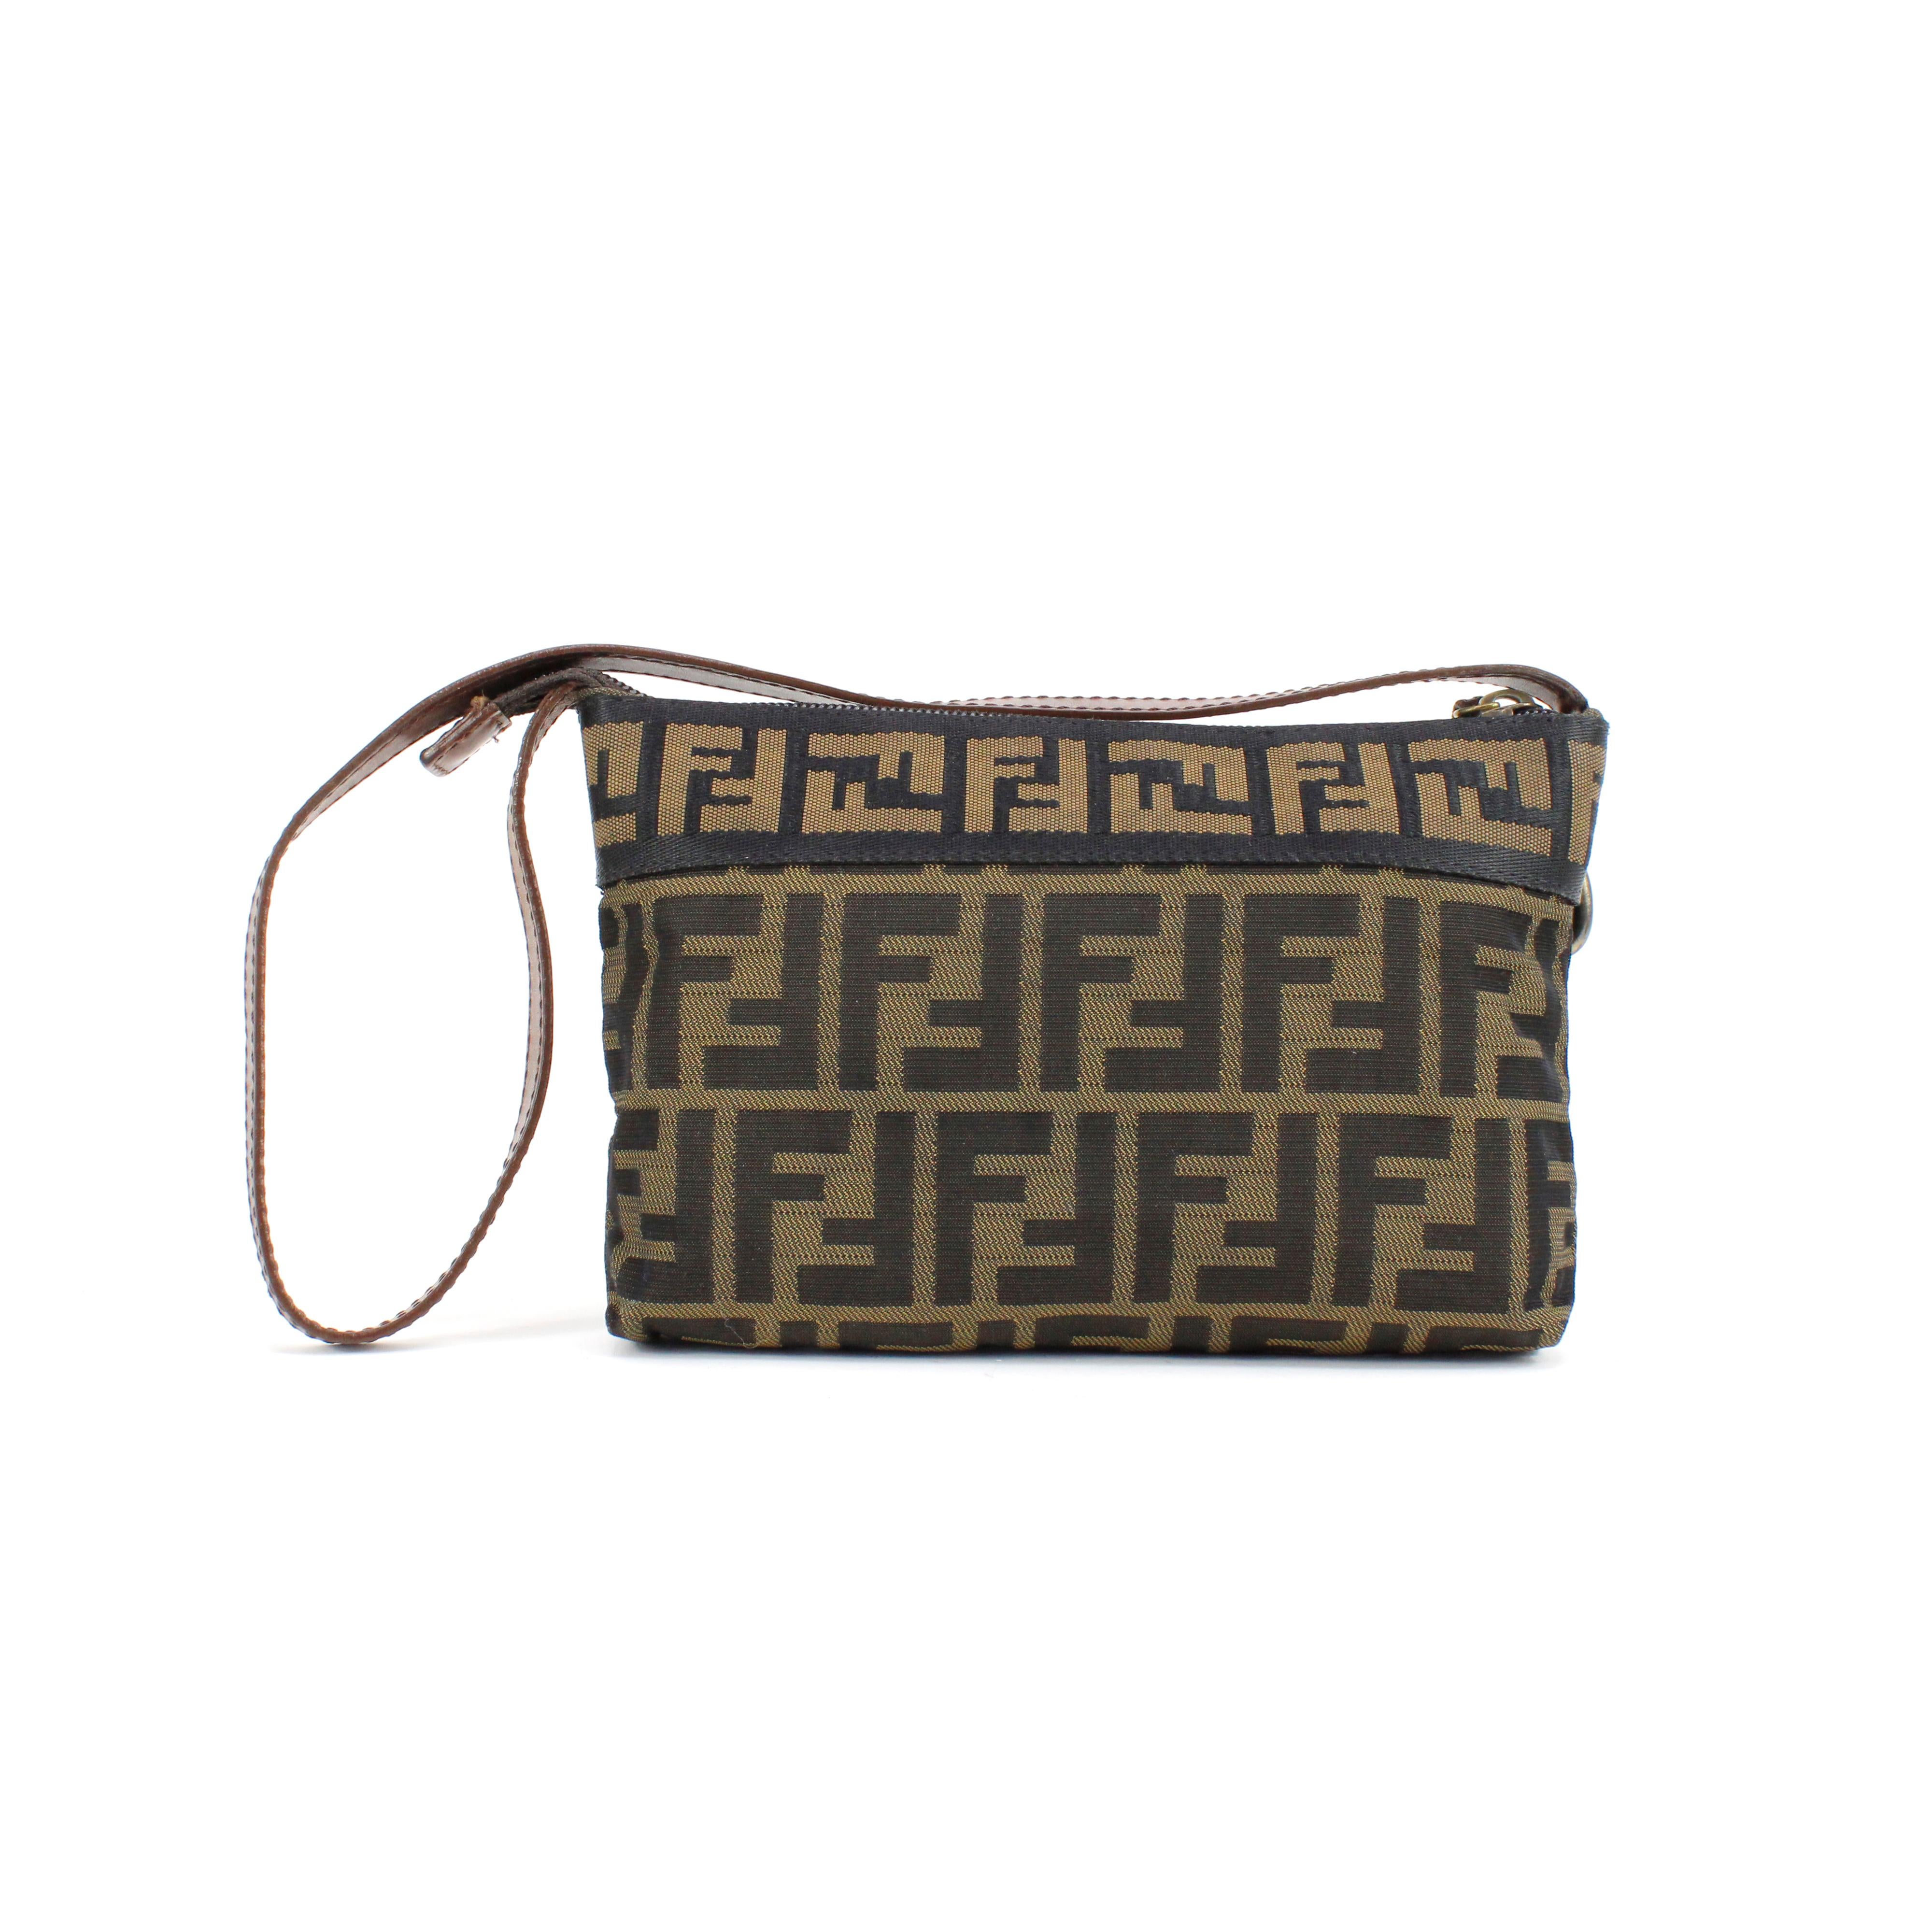 Fendi baguette in zucca canvas + brown leather.


Condition: 
Really good.


Packing/accessories:
Dustbag.

Measurements: 
Width: 18,5 cm
Height: 12 cm
Depth: 3 cm 